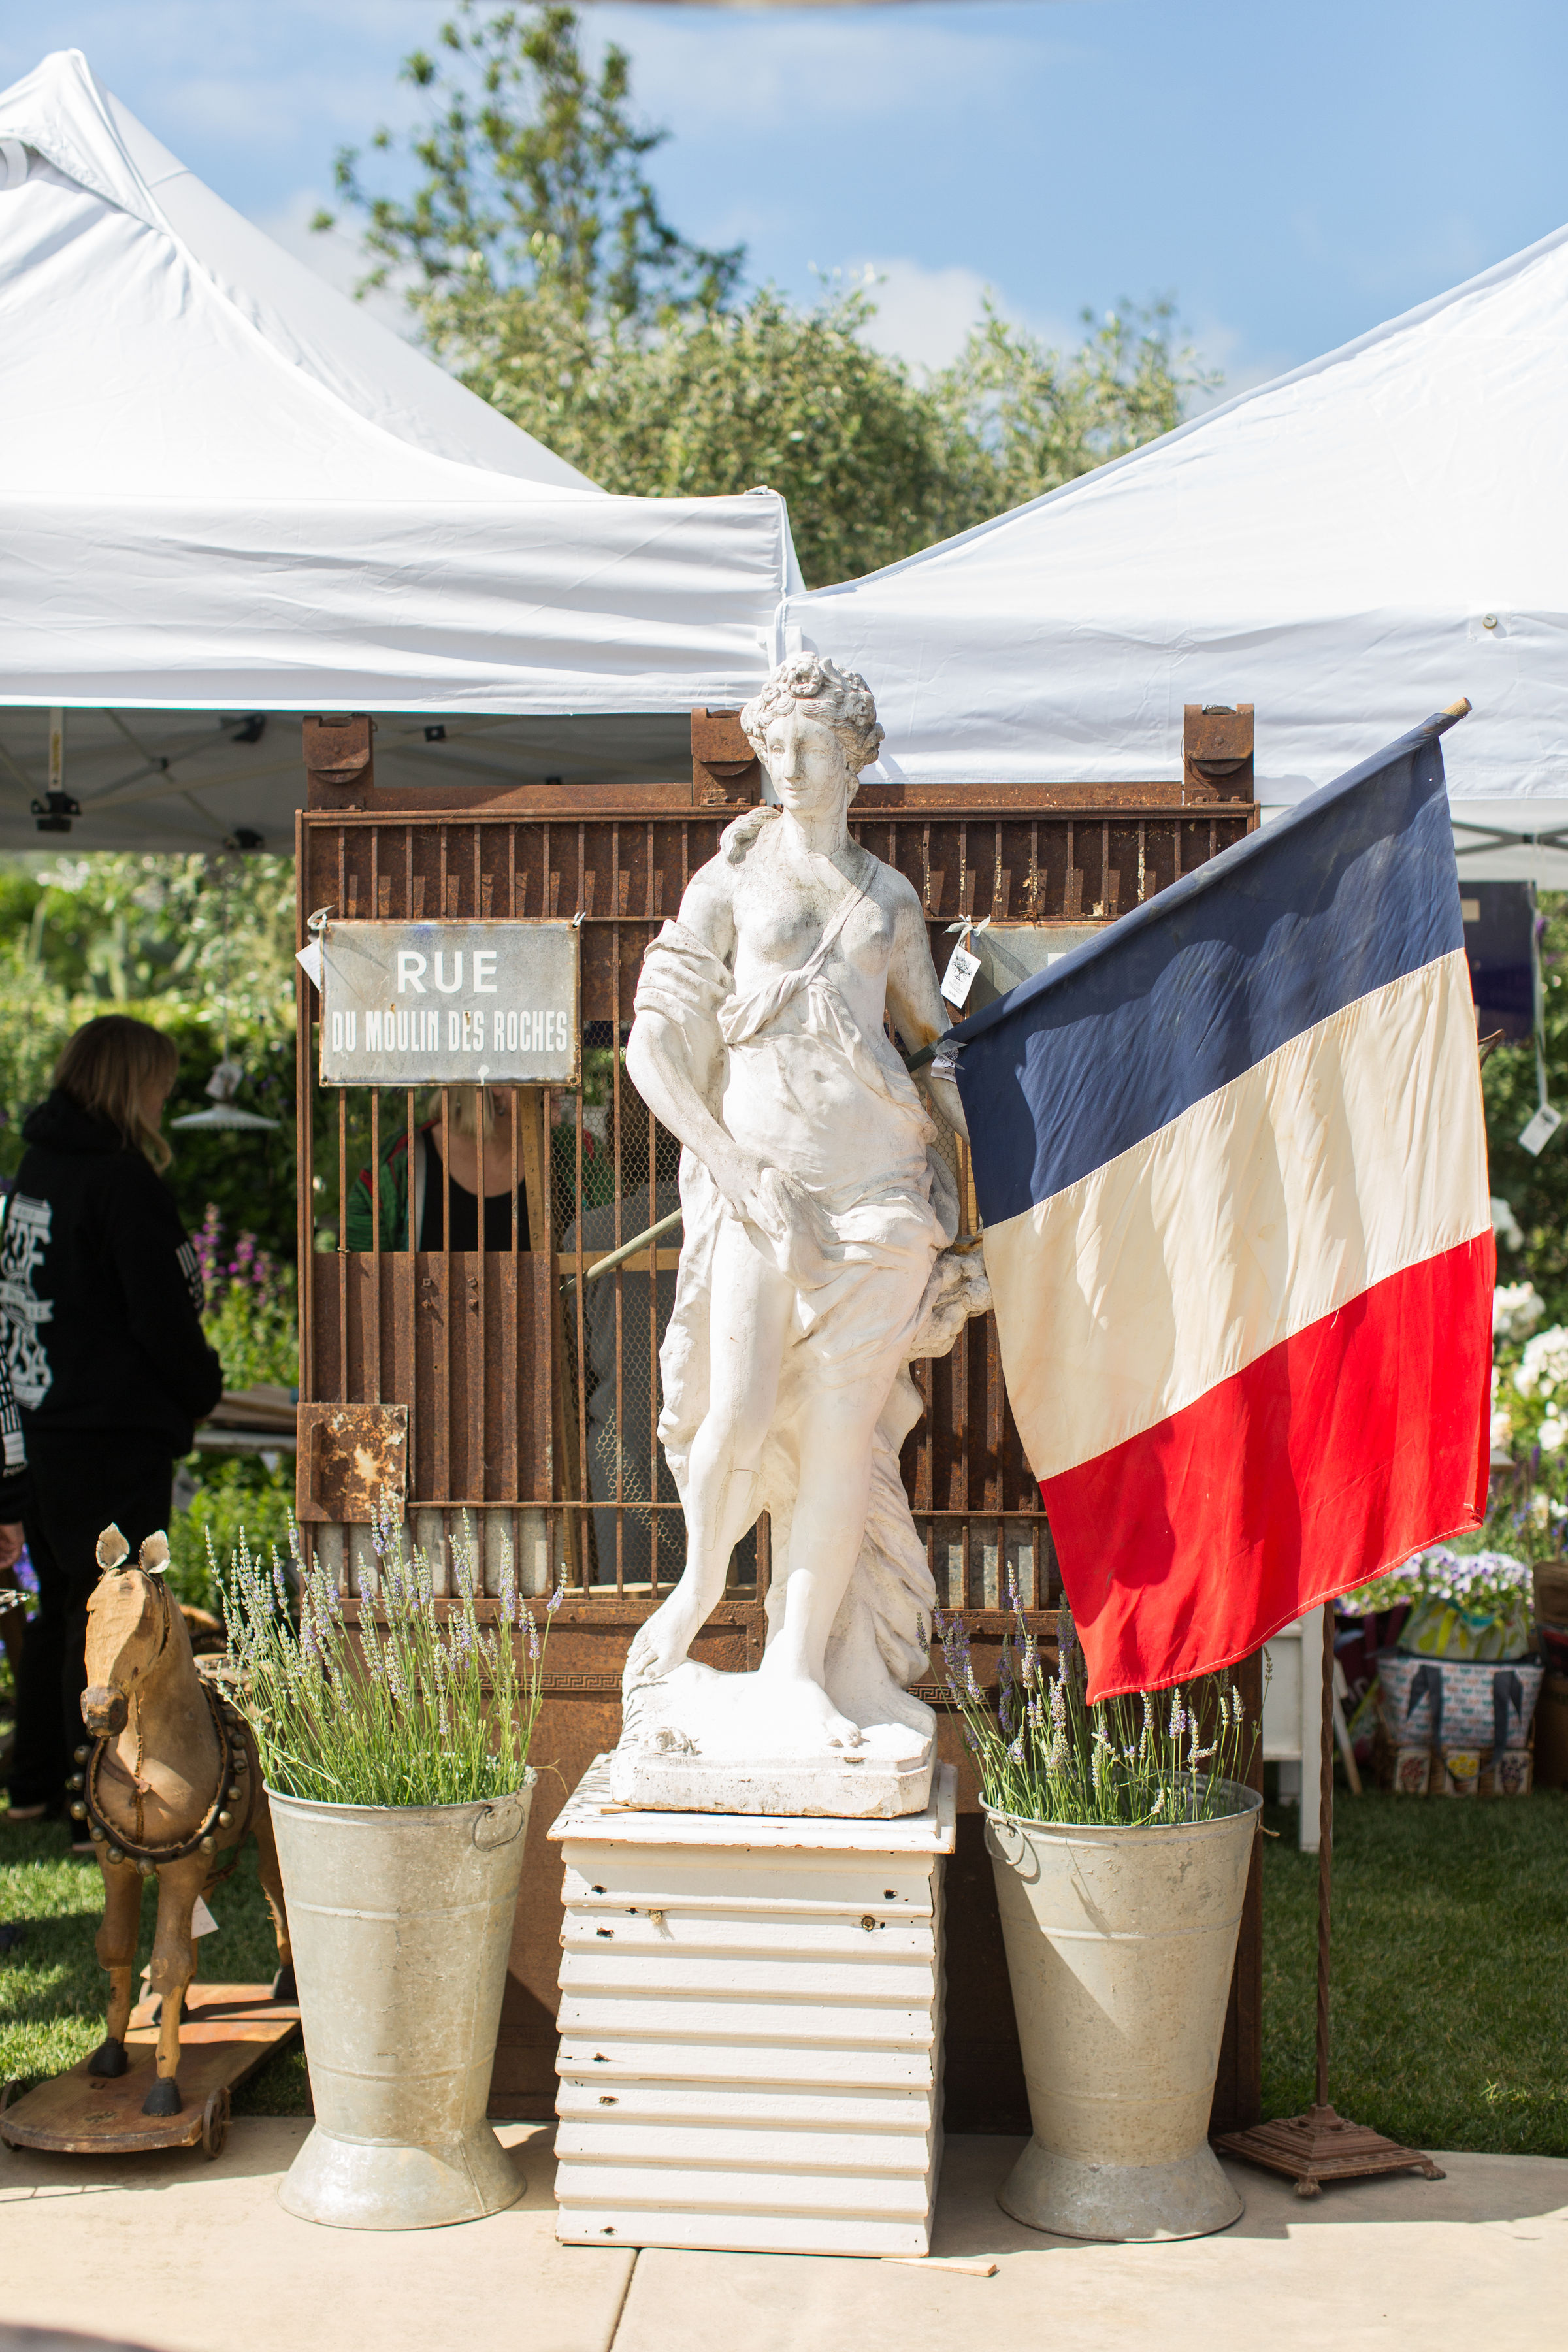 Chateau Sonoma, French Antiques, Sonoma California, Sonoma Events, Dinner Party, France, Viva La France, Bastille Day, Bastille Day Celebration, French Cuisine, French Wine, Mortar Pestle Cooking, Andreya Nightengale, Chateau Sonoma Farm, Farm Fresh…